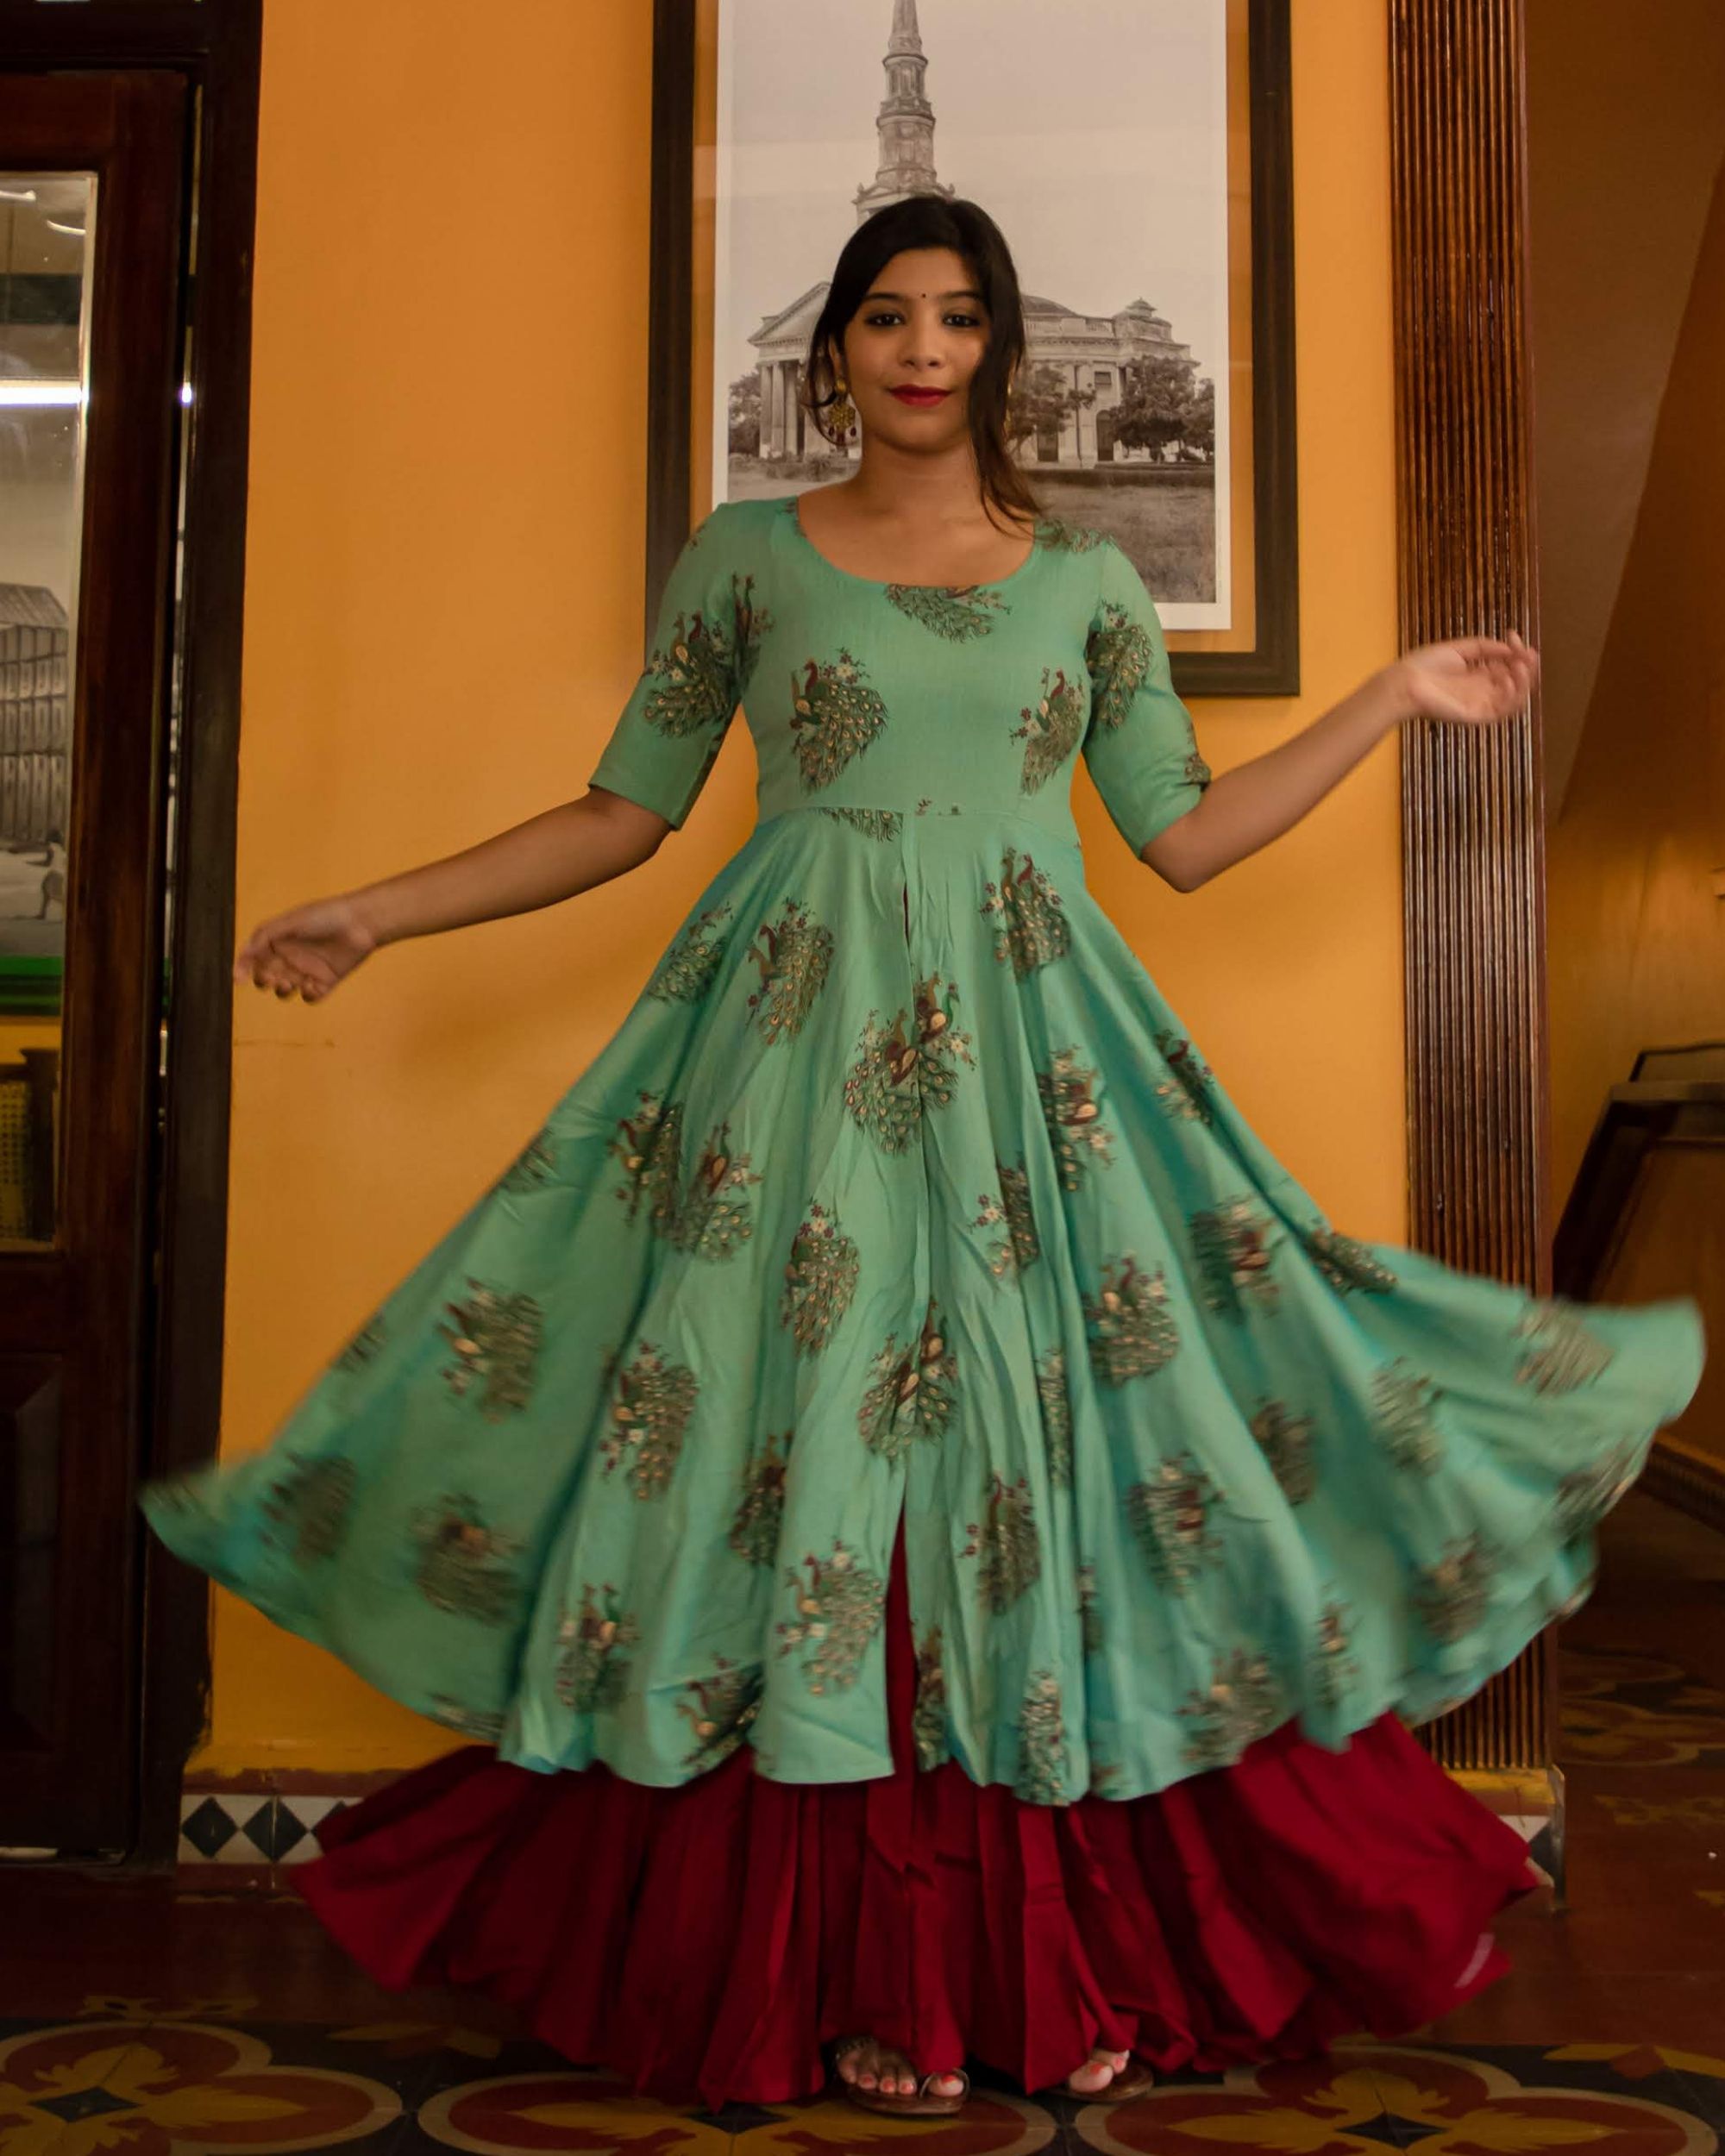 Sea Green peacock double layer dress by Athira Designs | The Secret Label